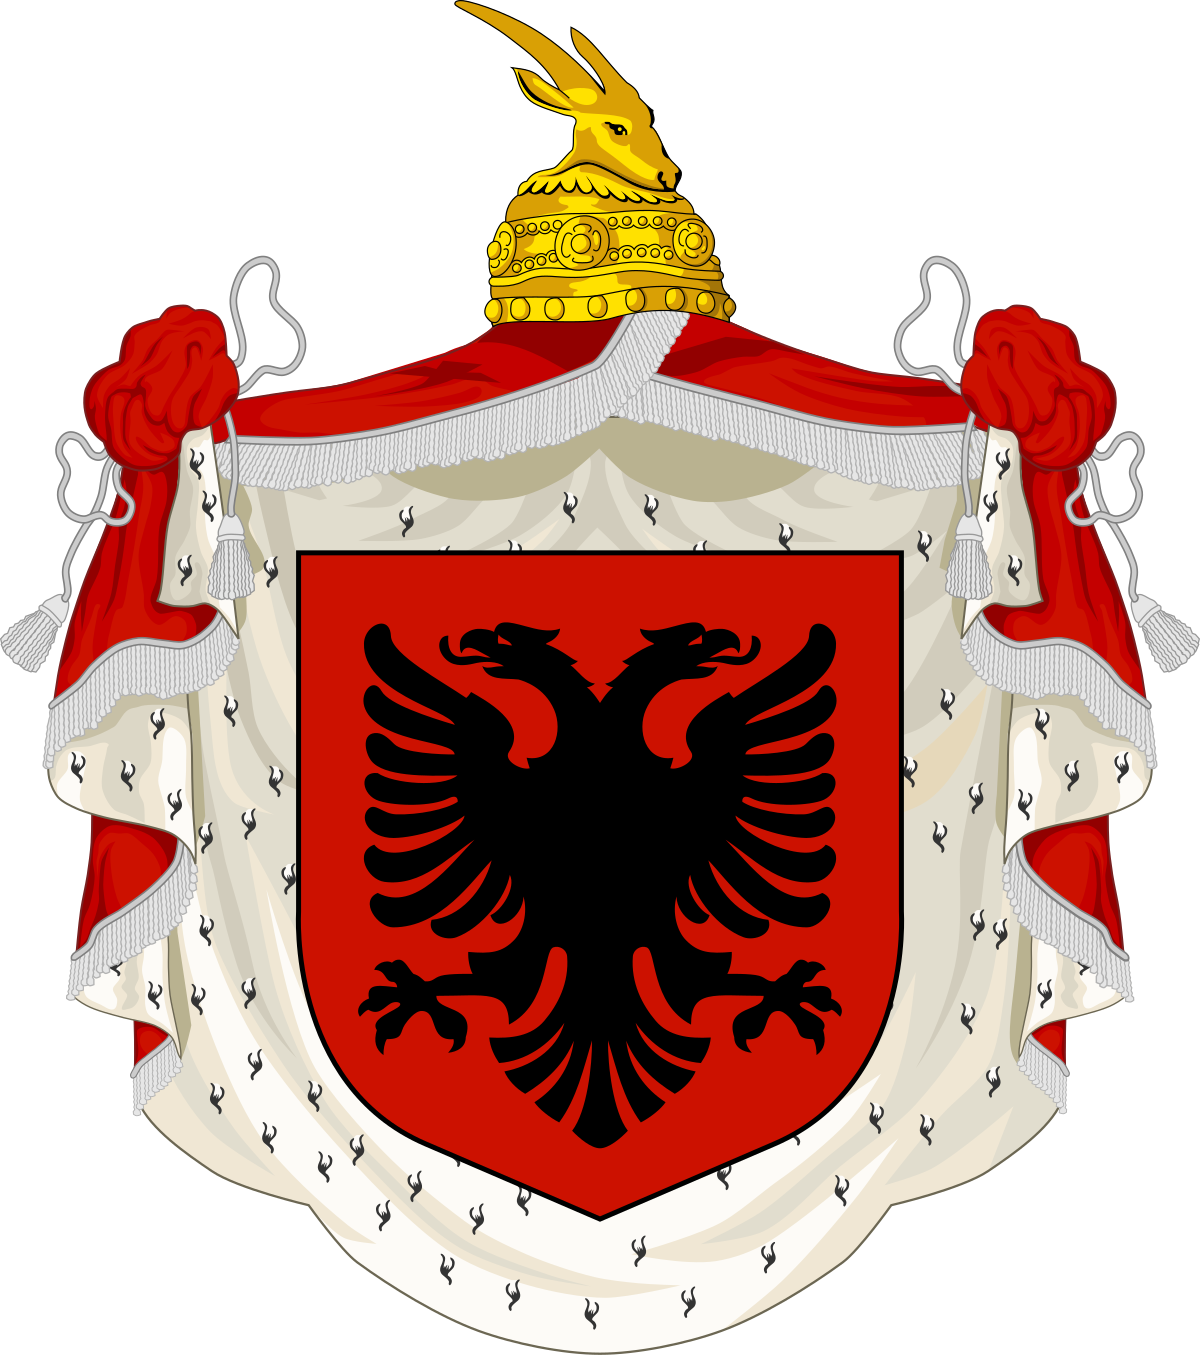 A Red And White Coat Of Arms With A Gold Crown